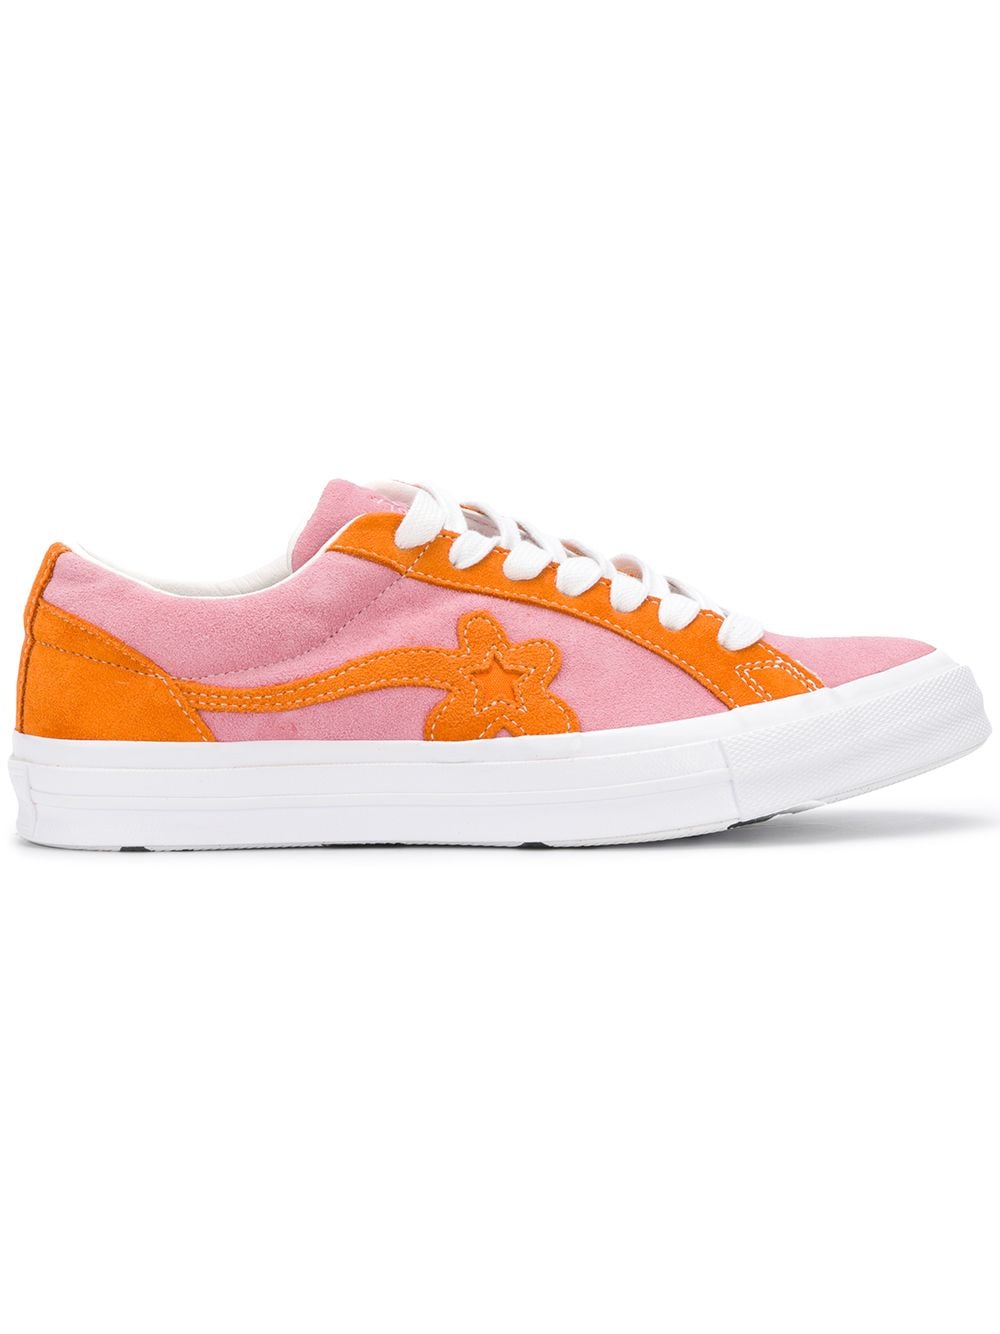 Converse floral embellished sneakers - Pink von Converse